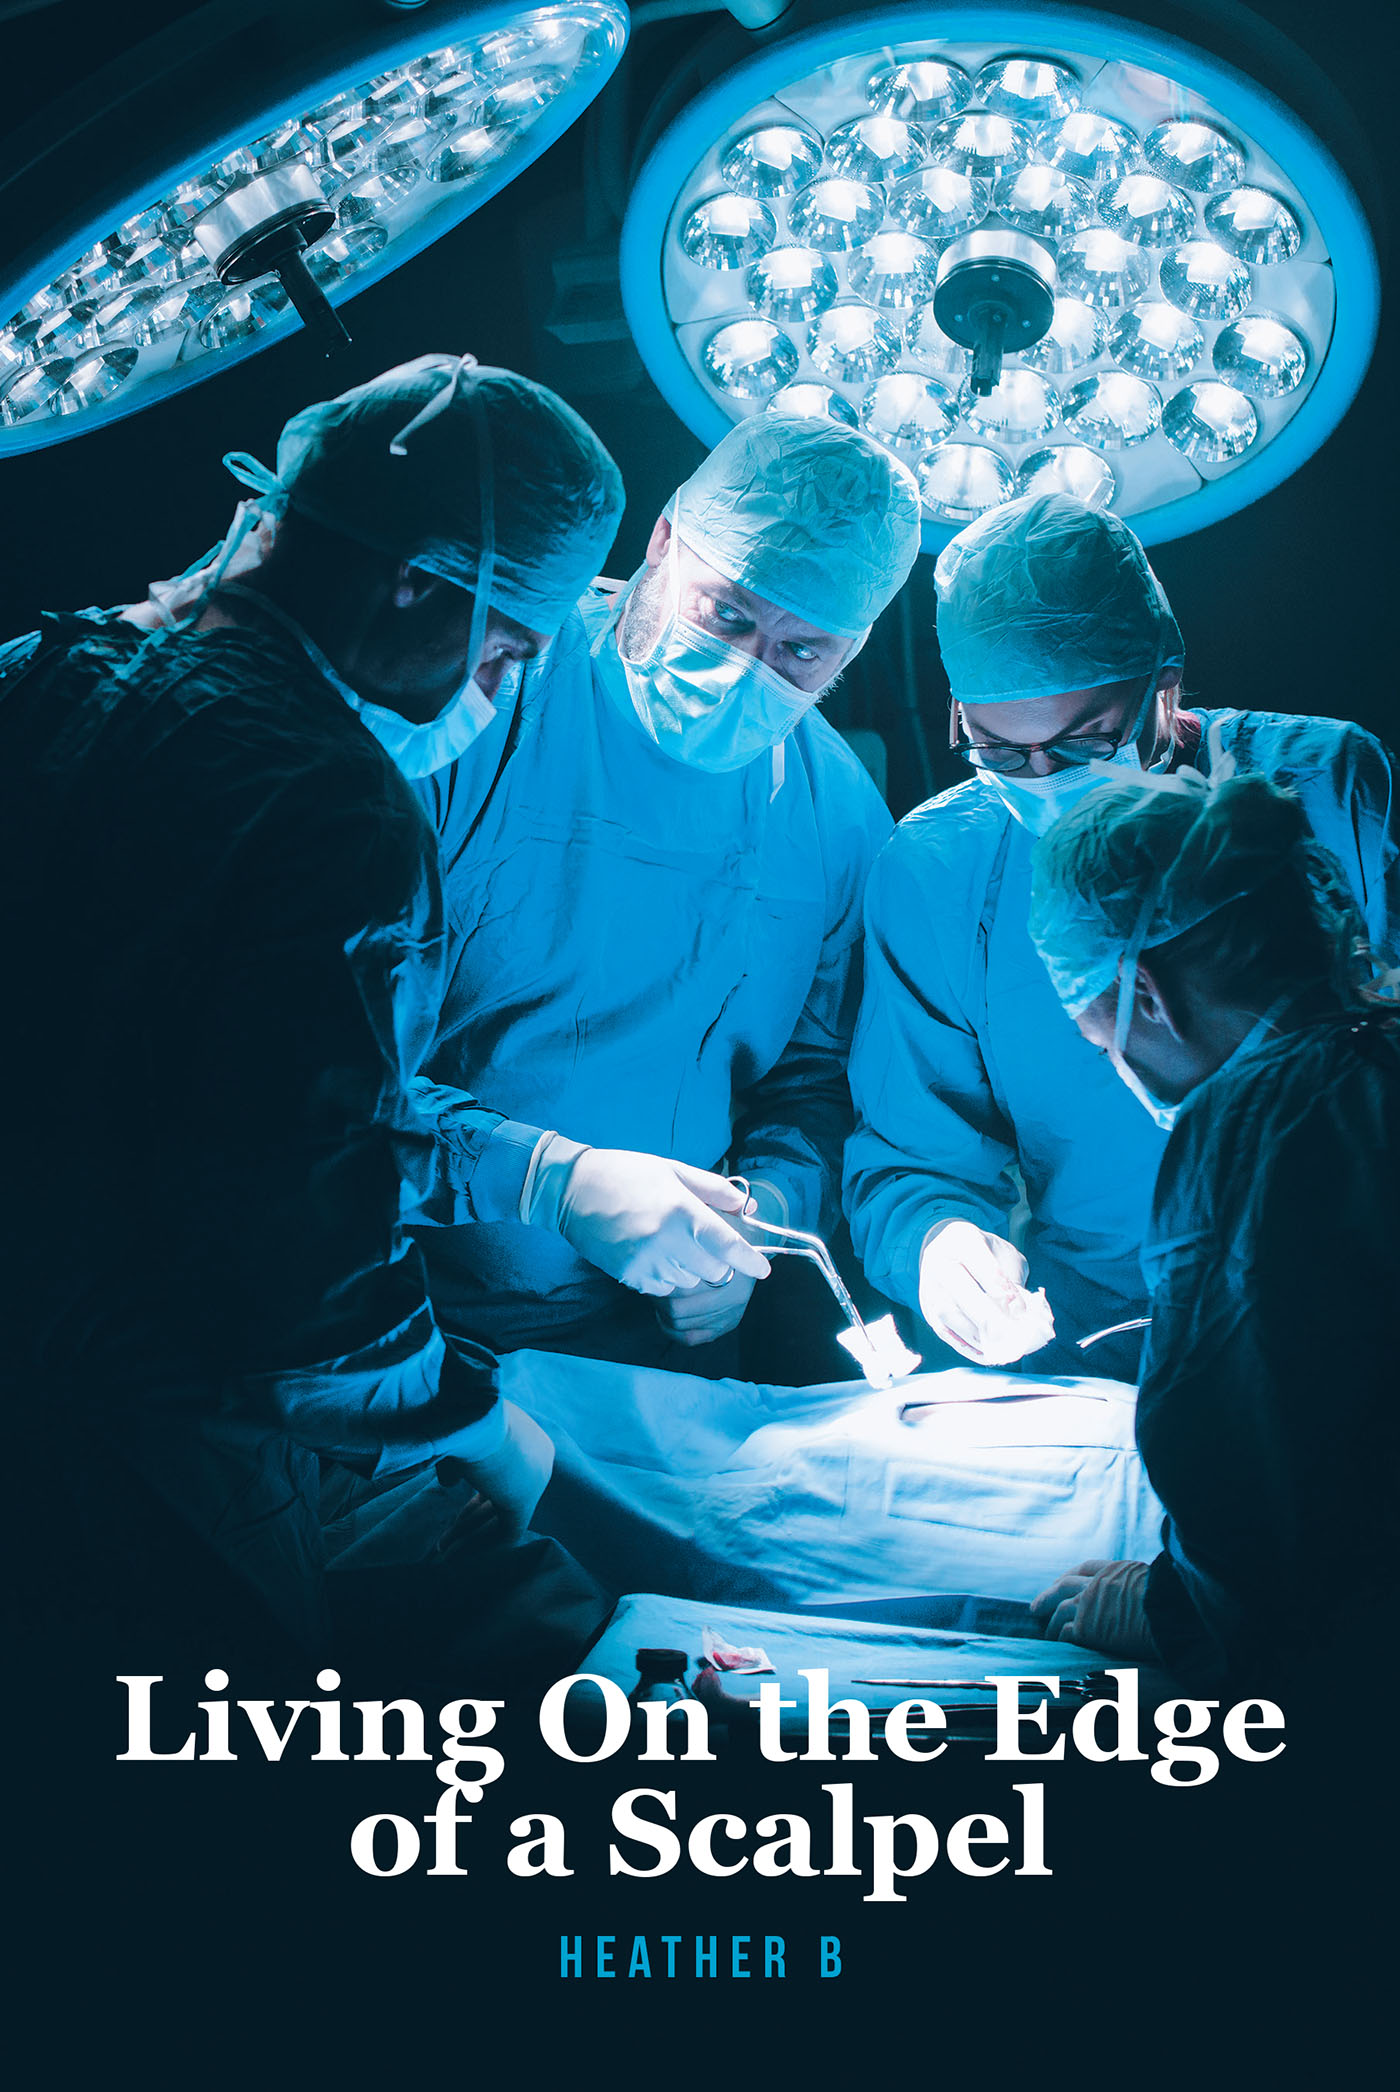 Heather B’s New Book, "Living on the Edge of a Scalpel," is a Powerful Story of Grief and Acceptance in the Face of Insurmountable Odds and Countless Trials